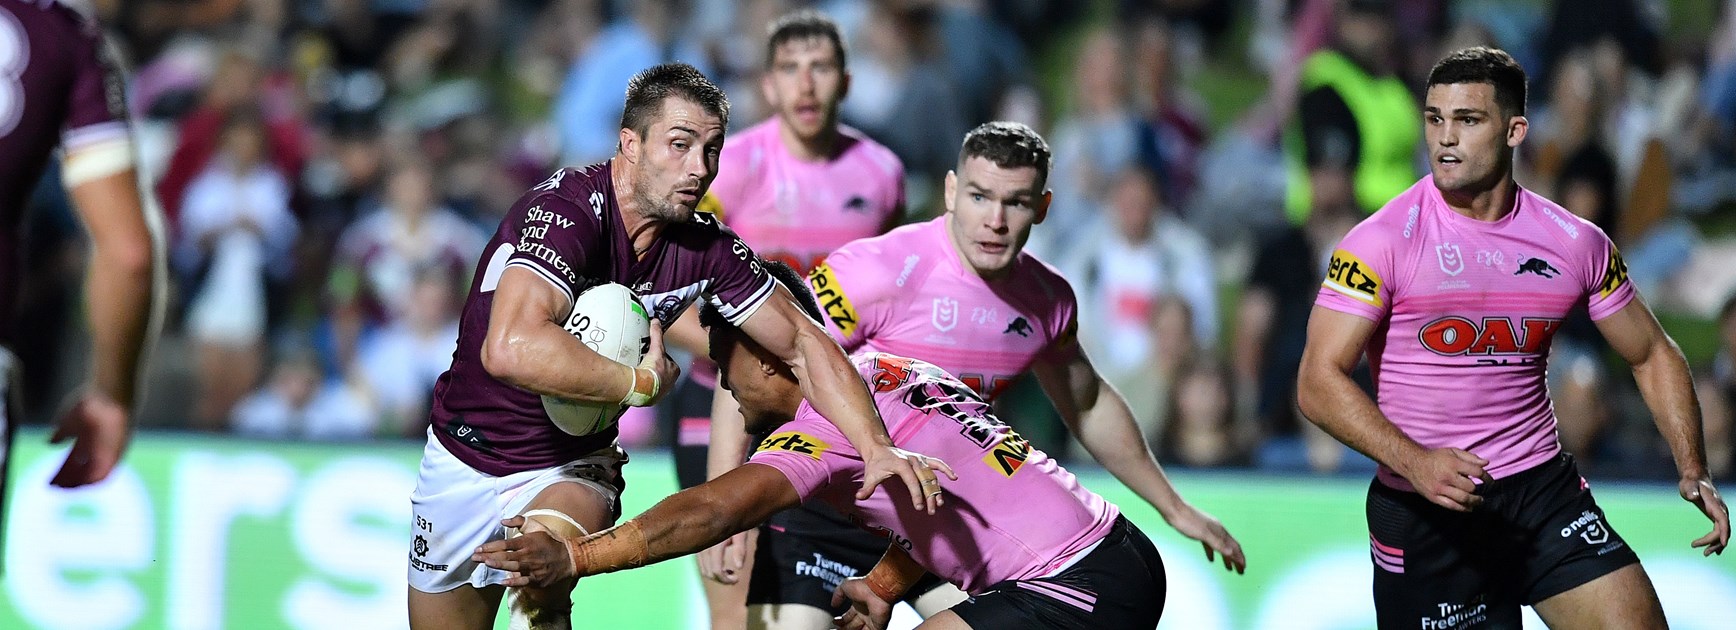 Complete failure: Manly must fix fumbling and bumbling - Foran